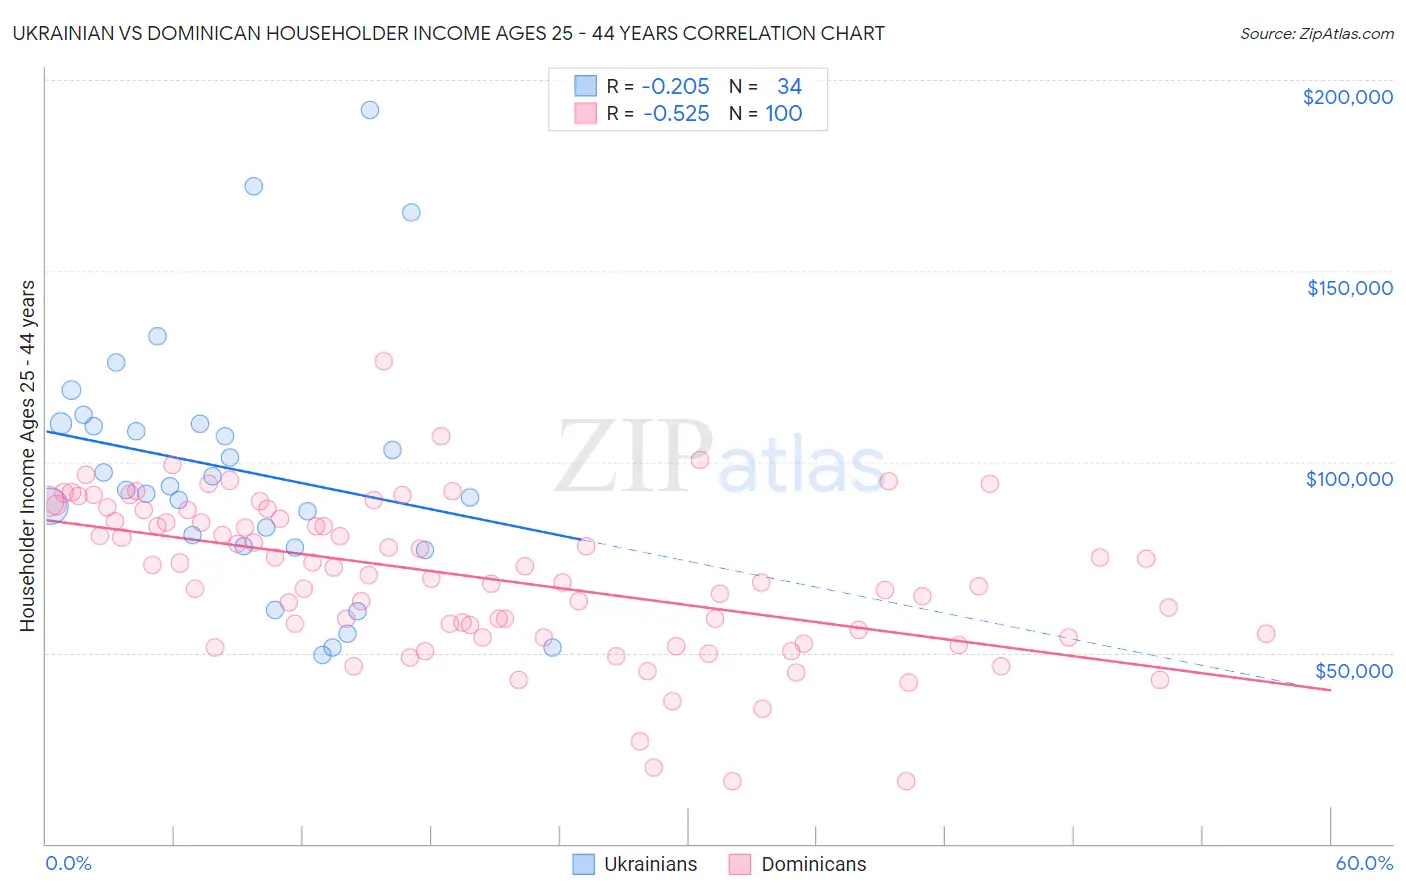 Ukrainian vs Dominican Householder Income Ages 25 - 44 years